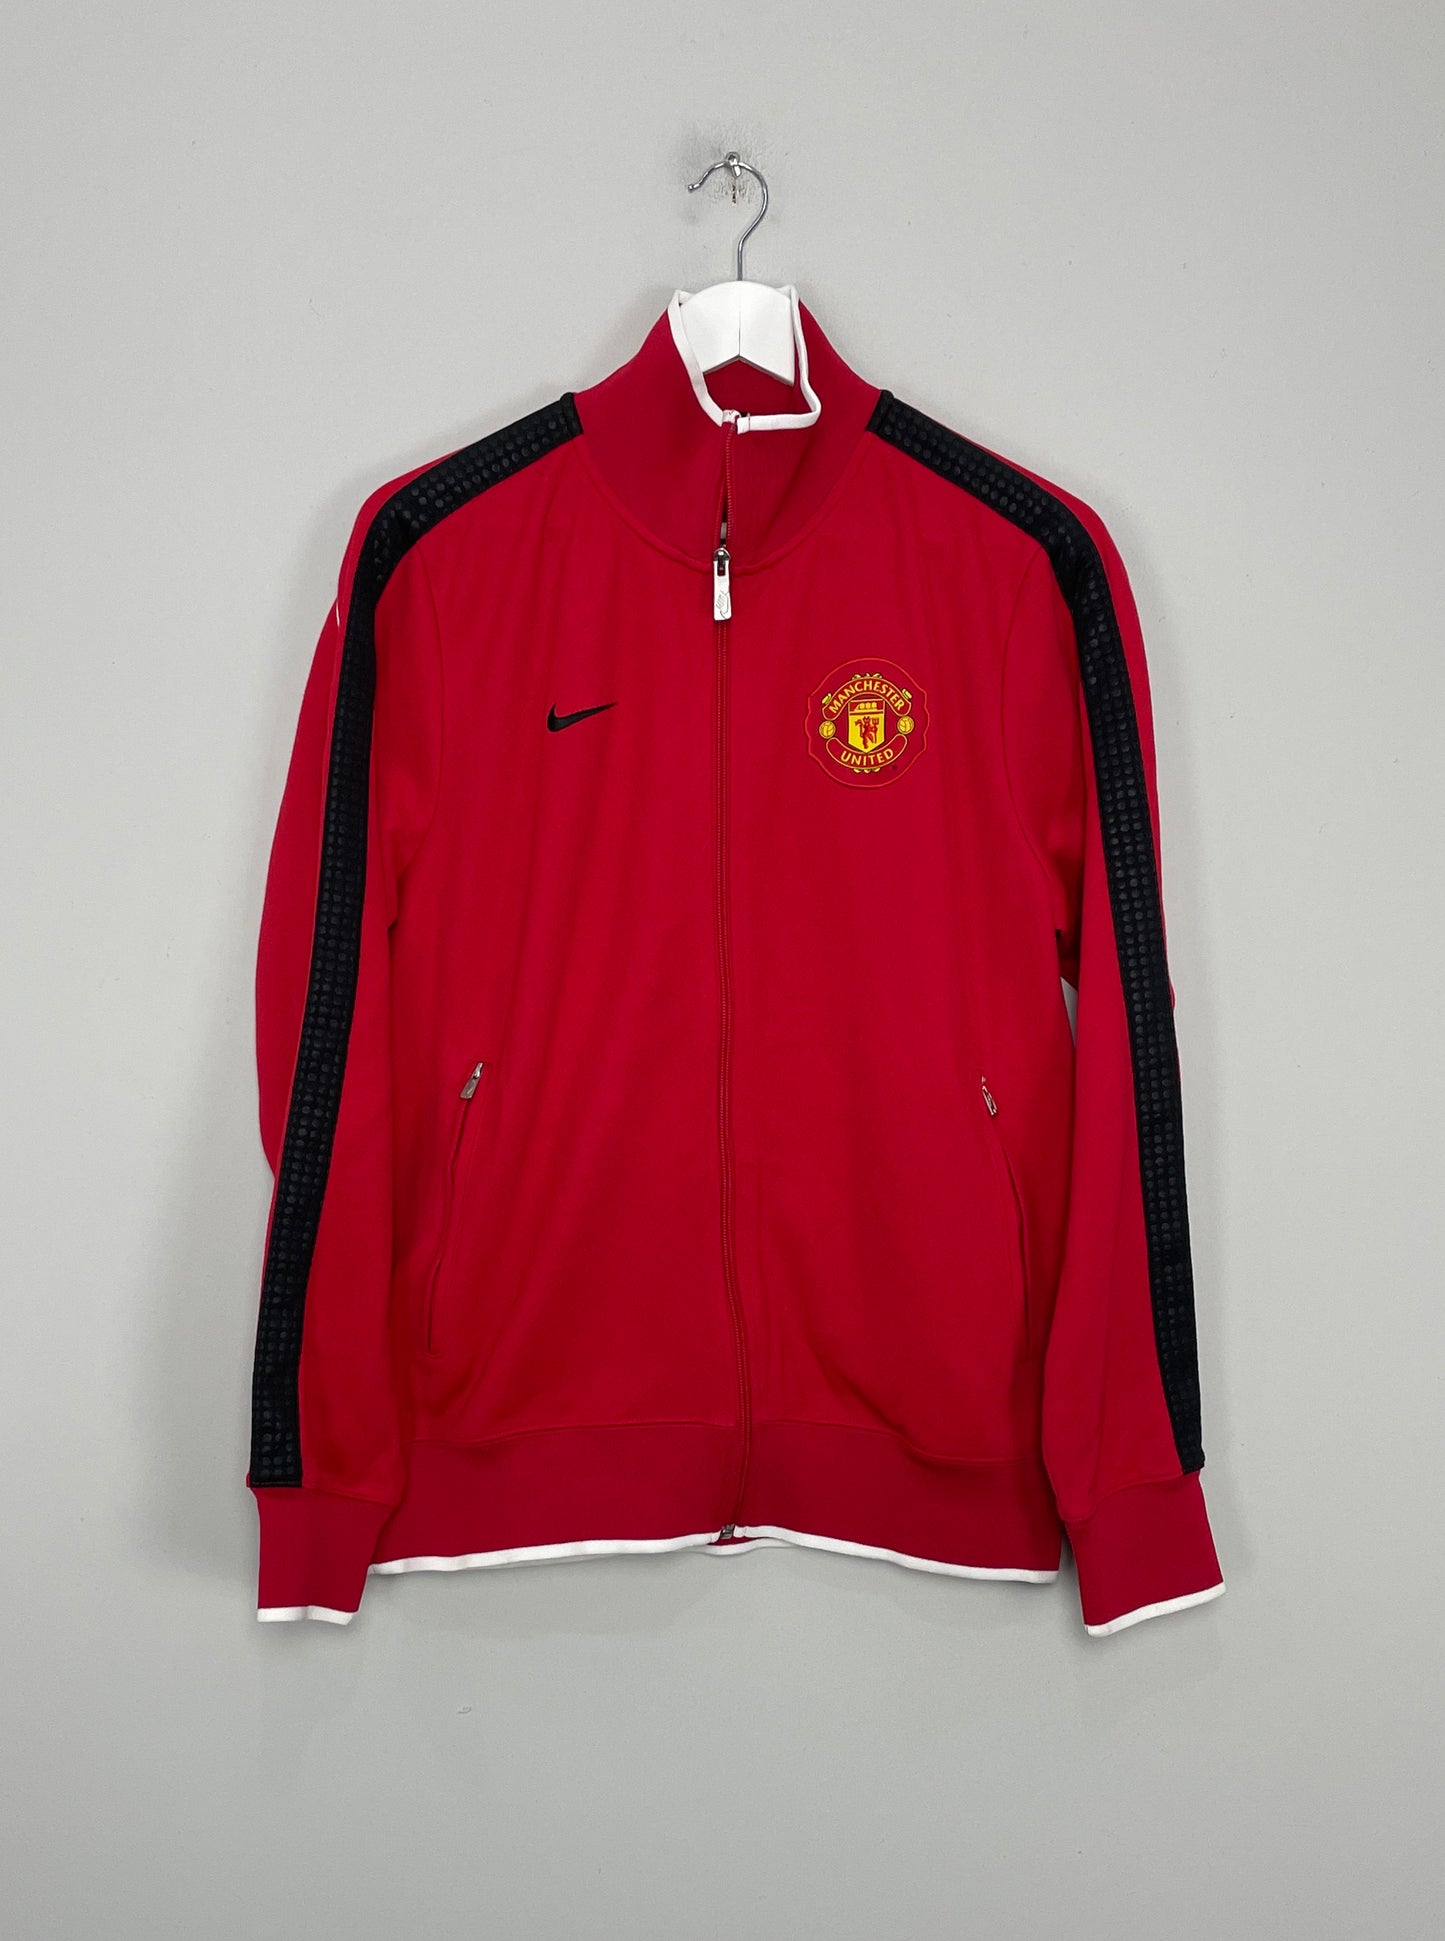 Image of the Manchester United jacket from the 2013/15 season